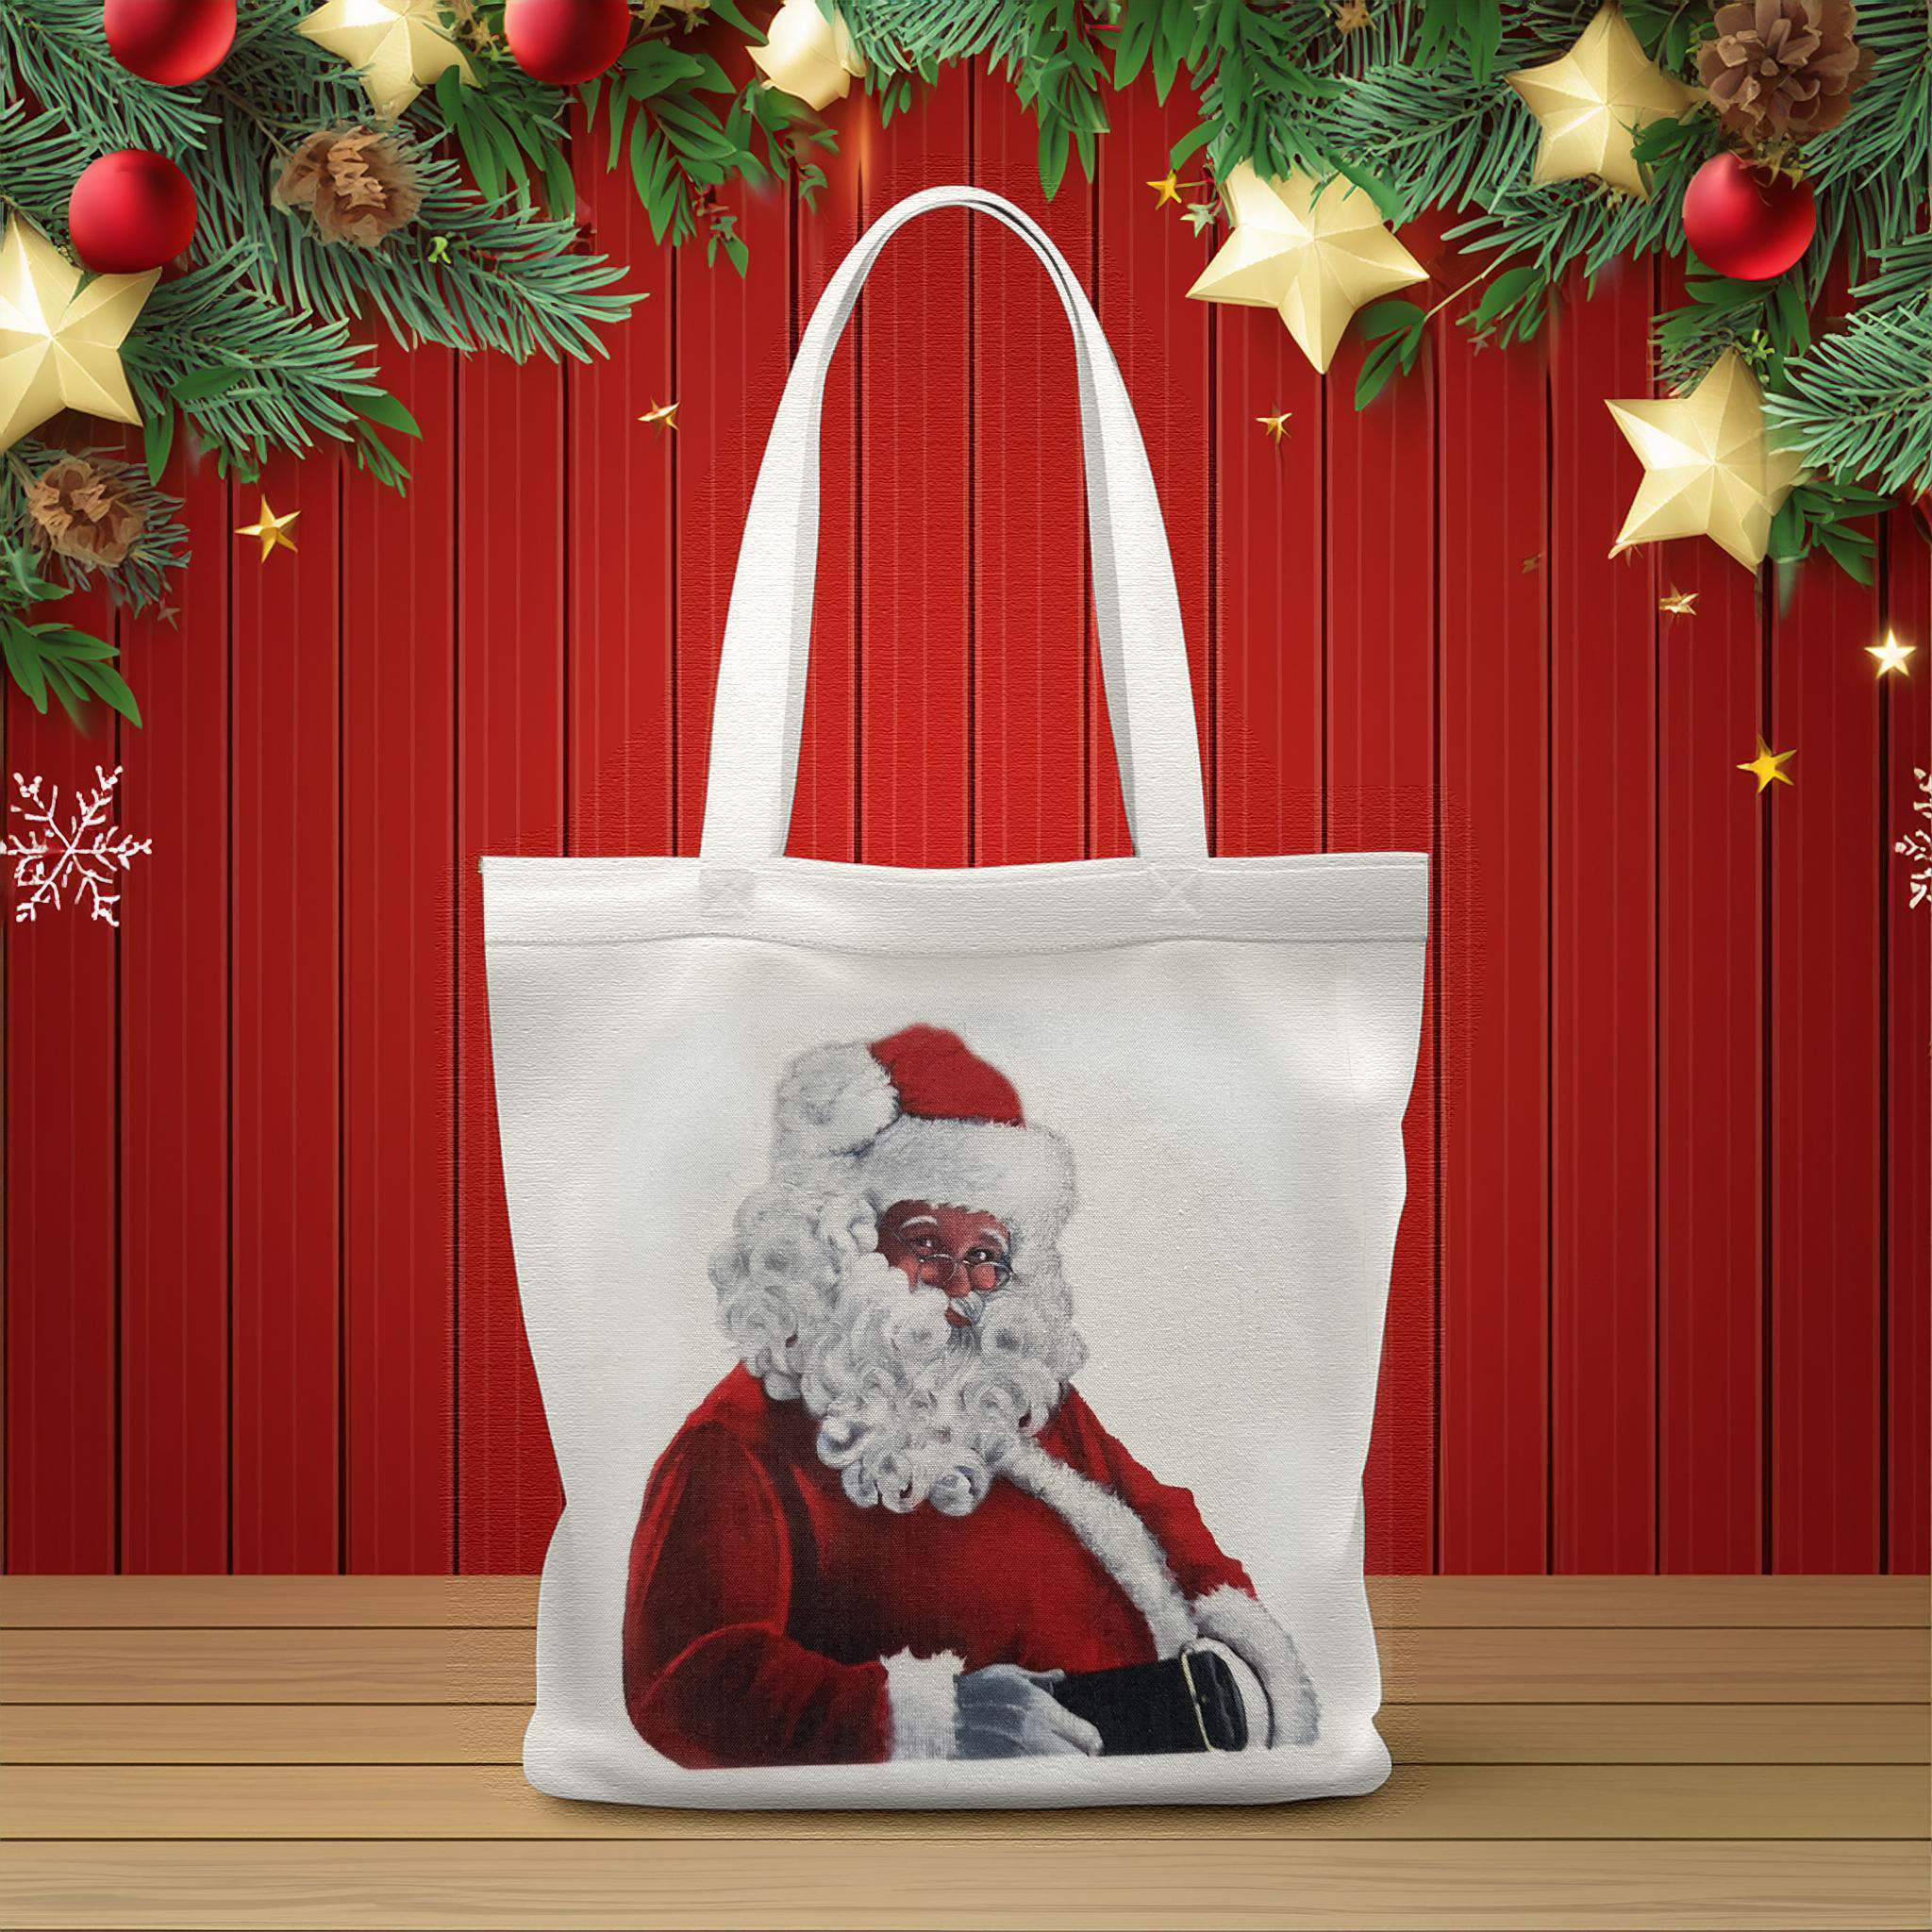 Tote Bag, Christmas Gift Bag with a Painting on it by Carol Landry, 13"x 15"